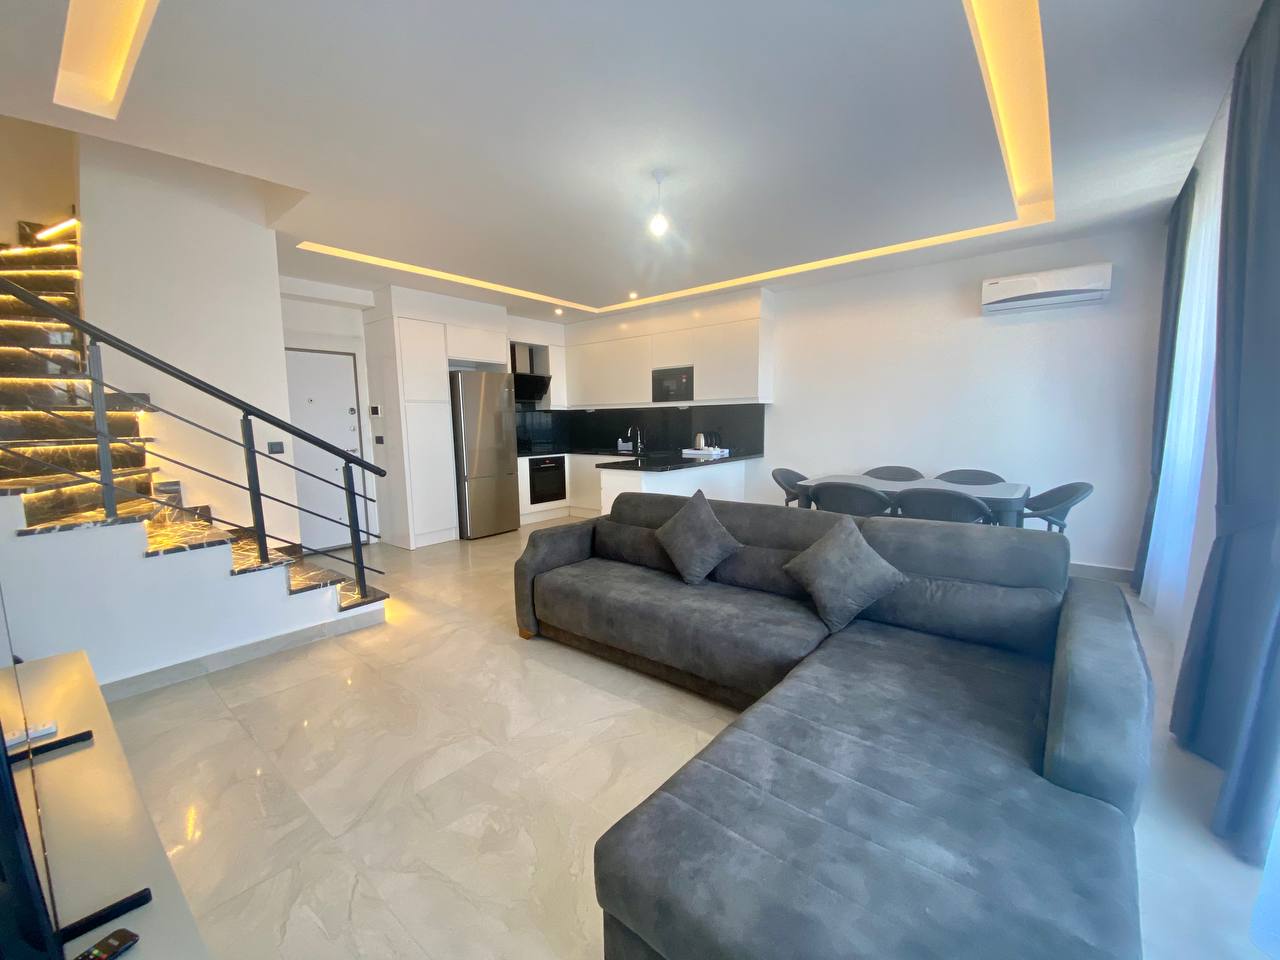 N°27 - Boutique 16 - Duplex Sea Front, For 8 People, Ultra Luxury